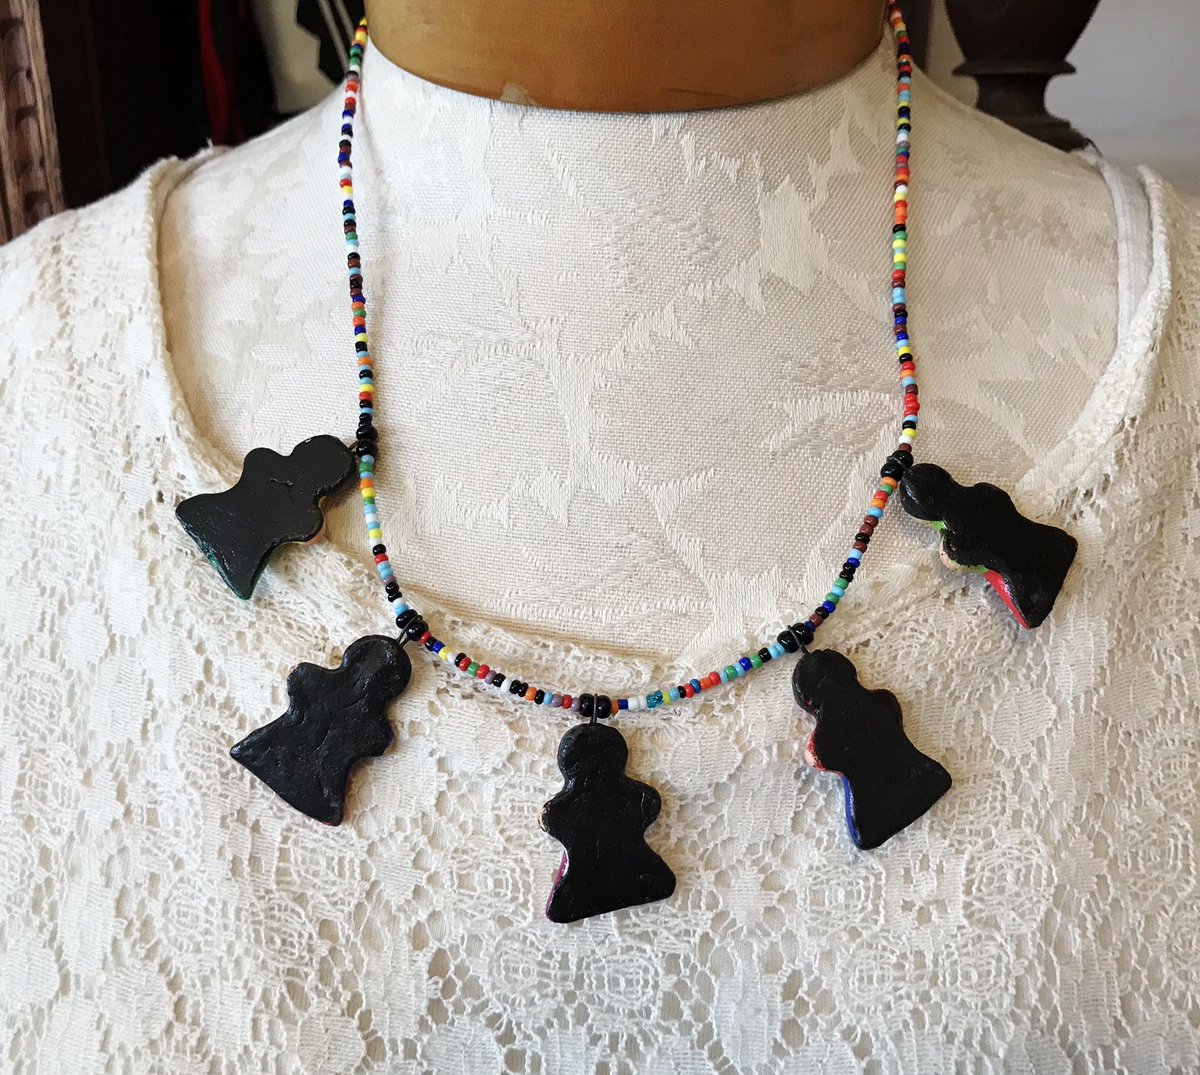 This vintage Mexican HAND-PAINTED CLaY DoLL NECKLACE has 5 hand painted clay ladies with long black hair and colorful skirts.
#EthnicNecklace
#MexicanDollNecklace
#HandPaintedDolls
#ClayDollNecklace
#MultiColorBeads
#VintageJewelry
#DollJewelry
etsy.me/2XsOIvP